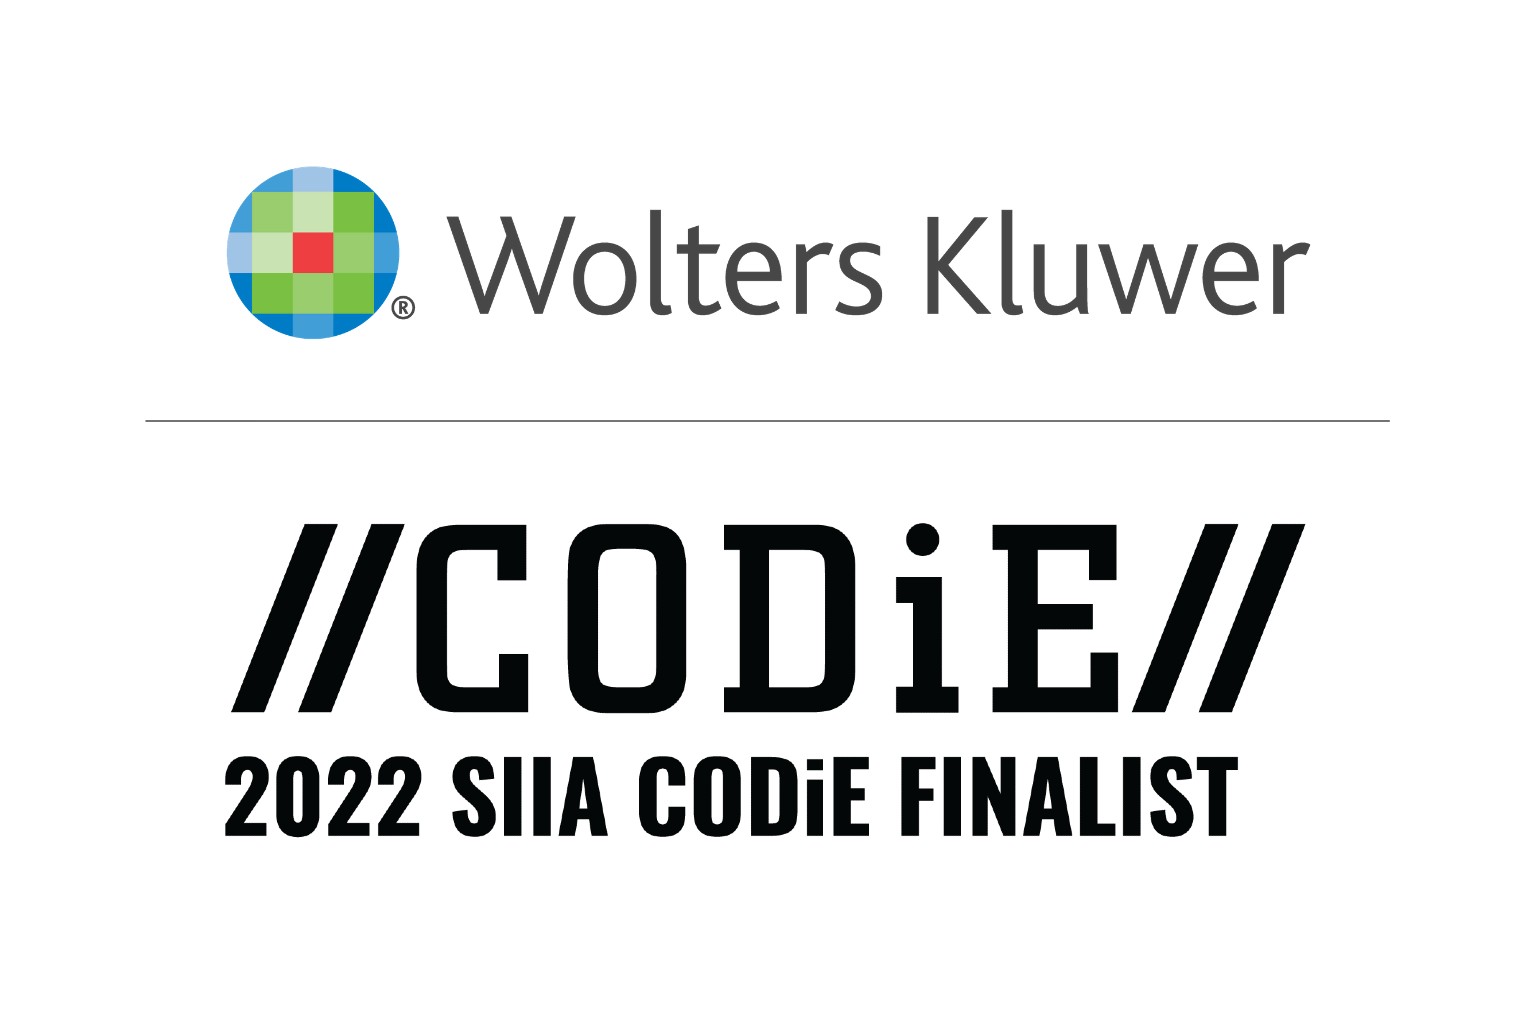 Wolters Kluwer named 2022 SIIA CODiE award finalist in 7 categories